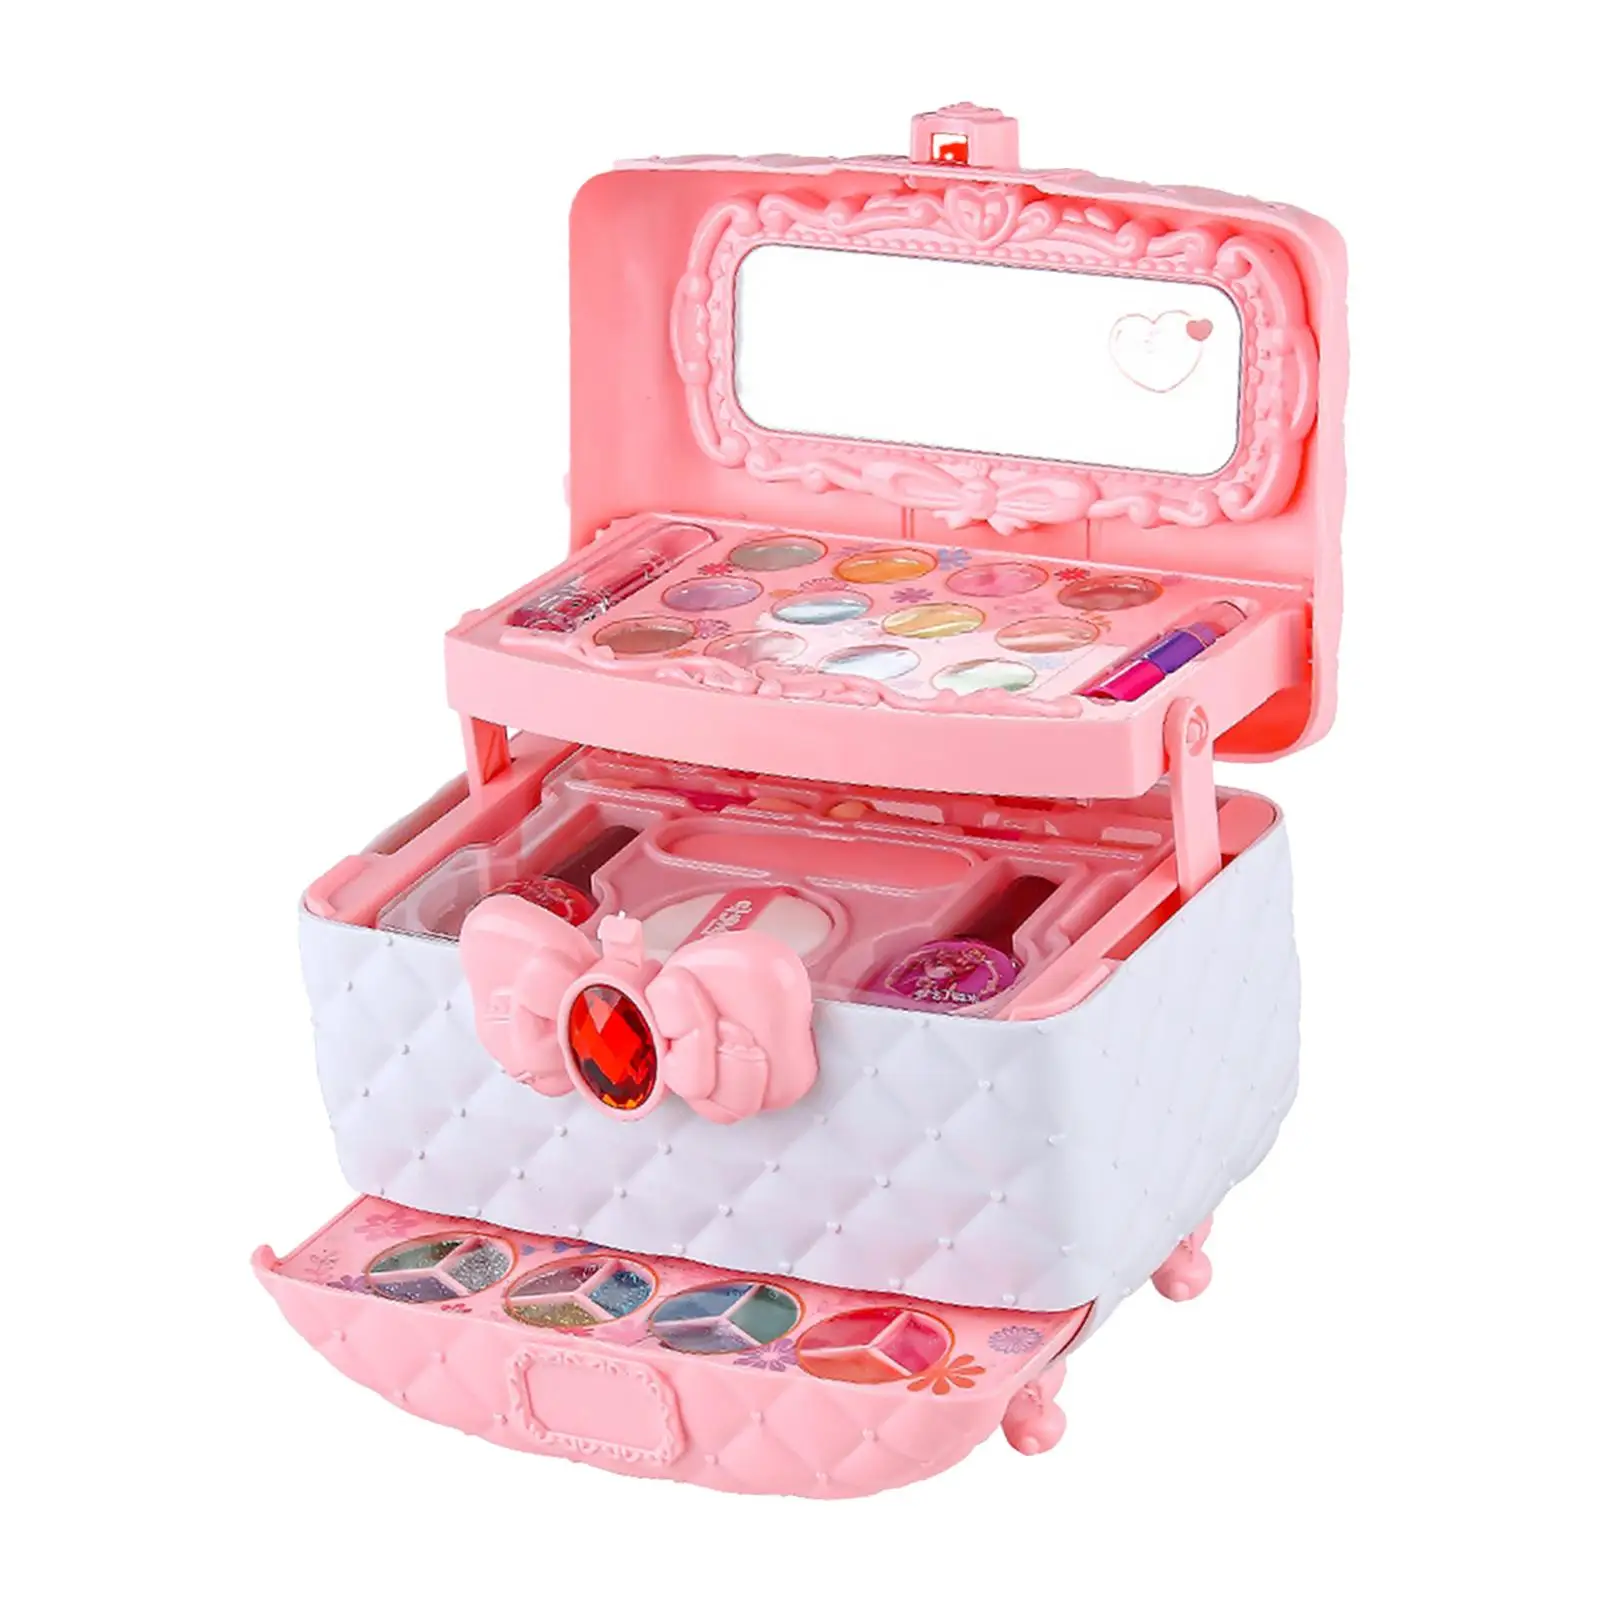 Kids Makeup Set with Cosmetic Case with Mirror Washable Makeup Set Toy Makeup Vanity Toy for Toddlers Girls Children Kids Gifts